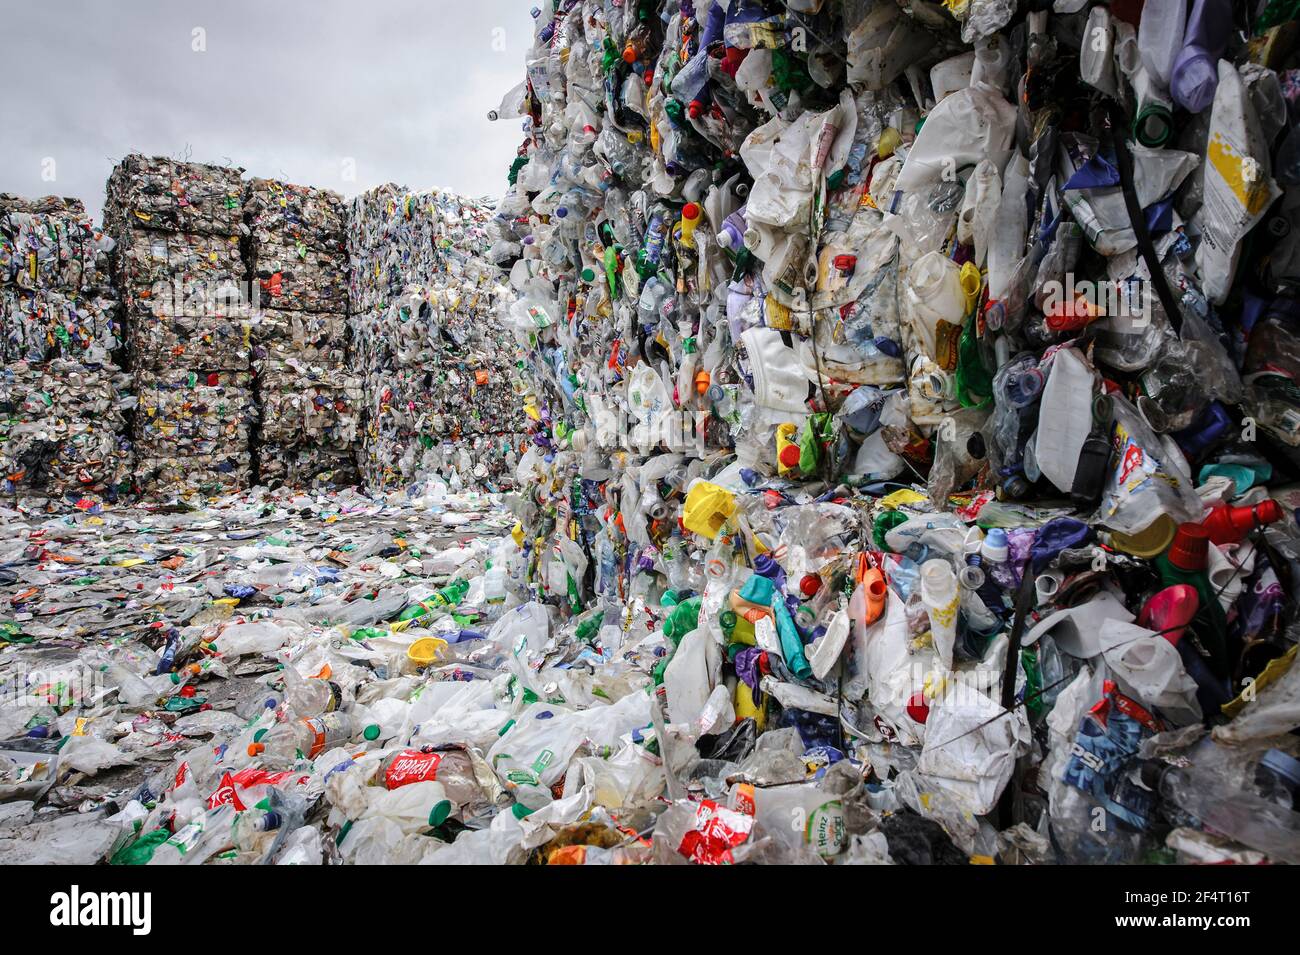 Bales of plastic waste at a materials recycling facility in the UK. Stock Photo